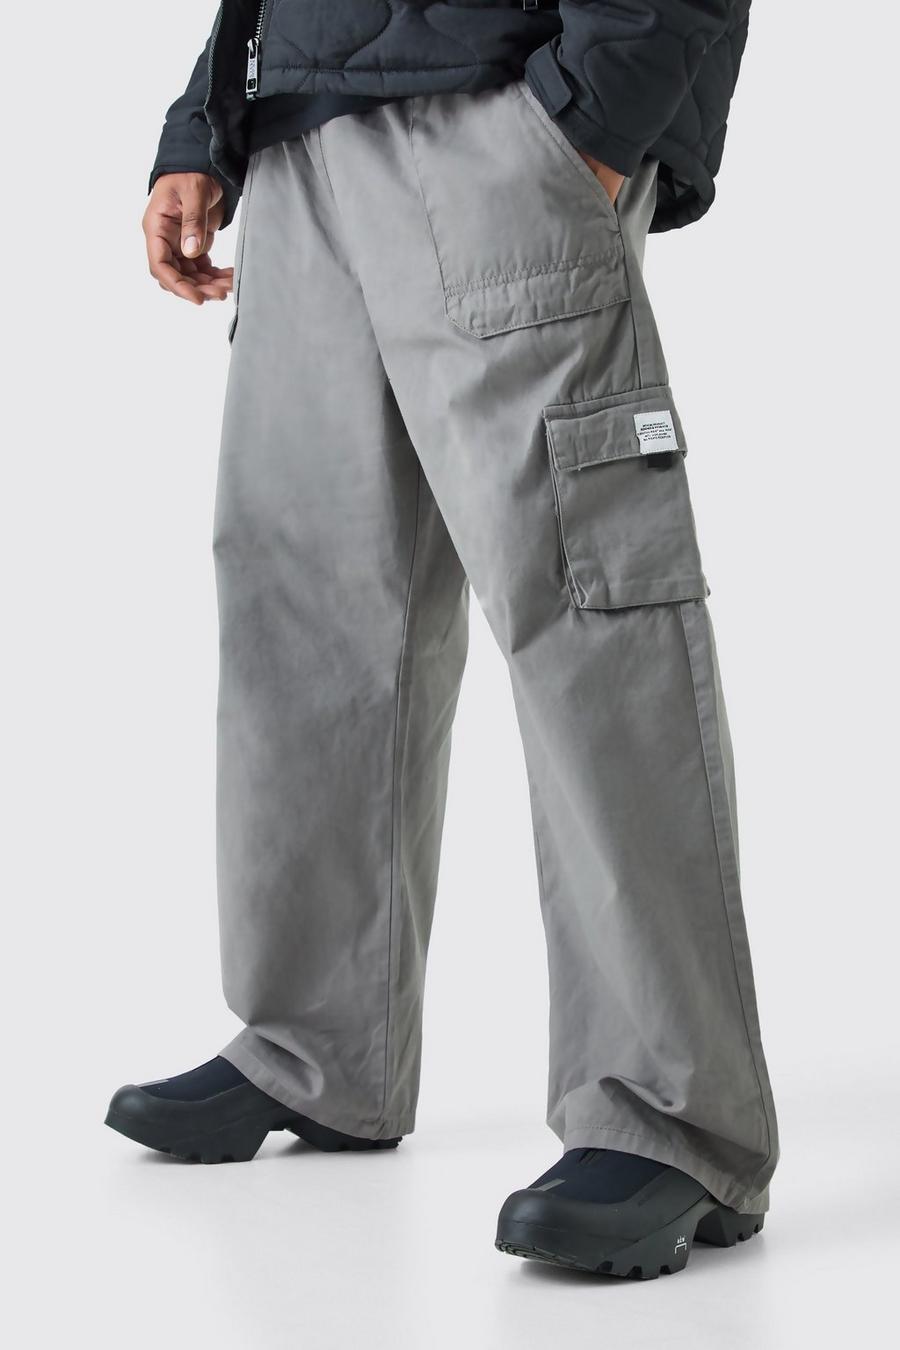 Slate Plus Elastic Waist Relaxed Fit Buckle Cargo Jogger